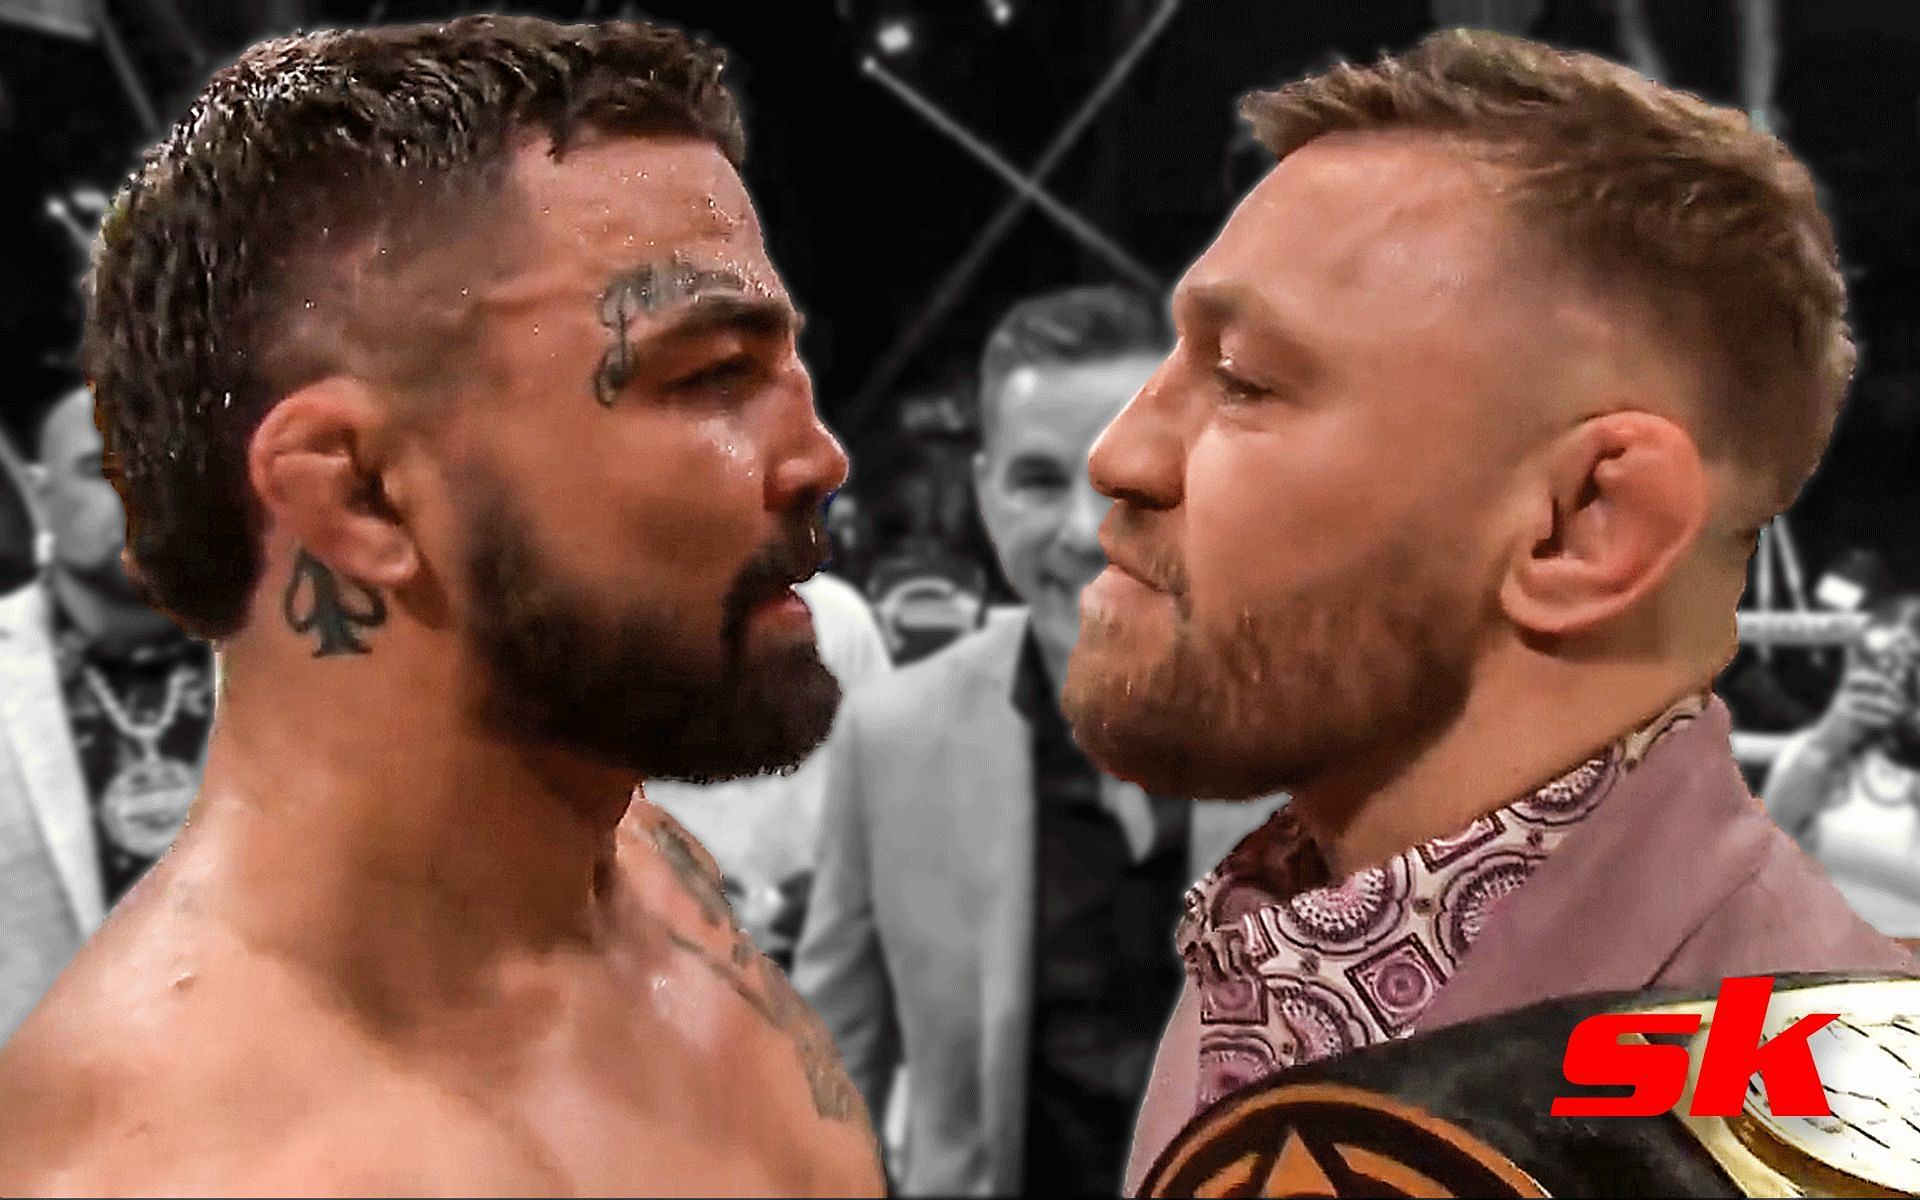 Conor McGregor and Mike Perry (Image Credits:@FiteTV on Twitter)